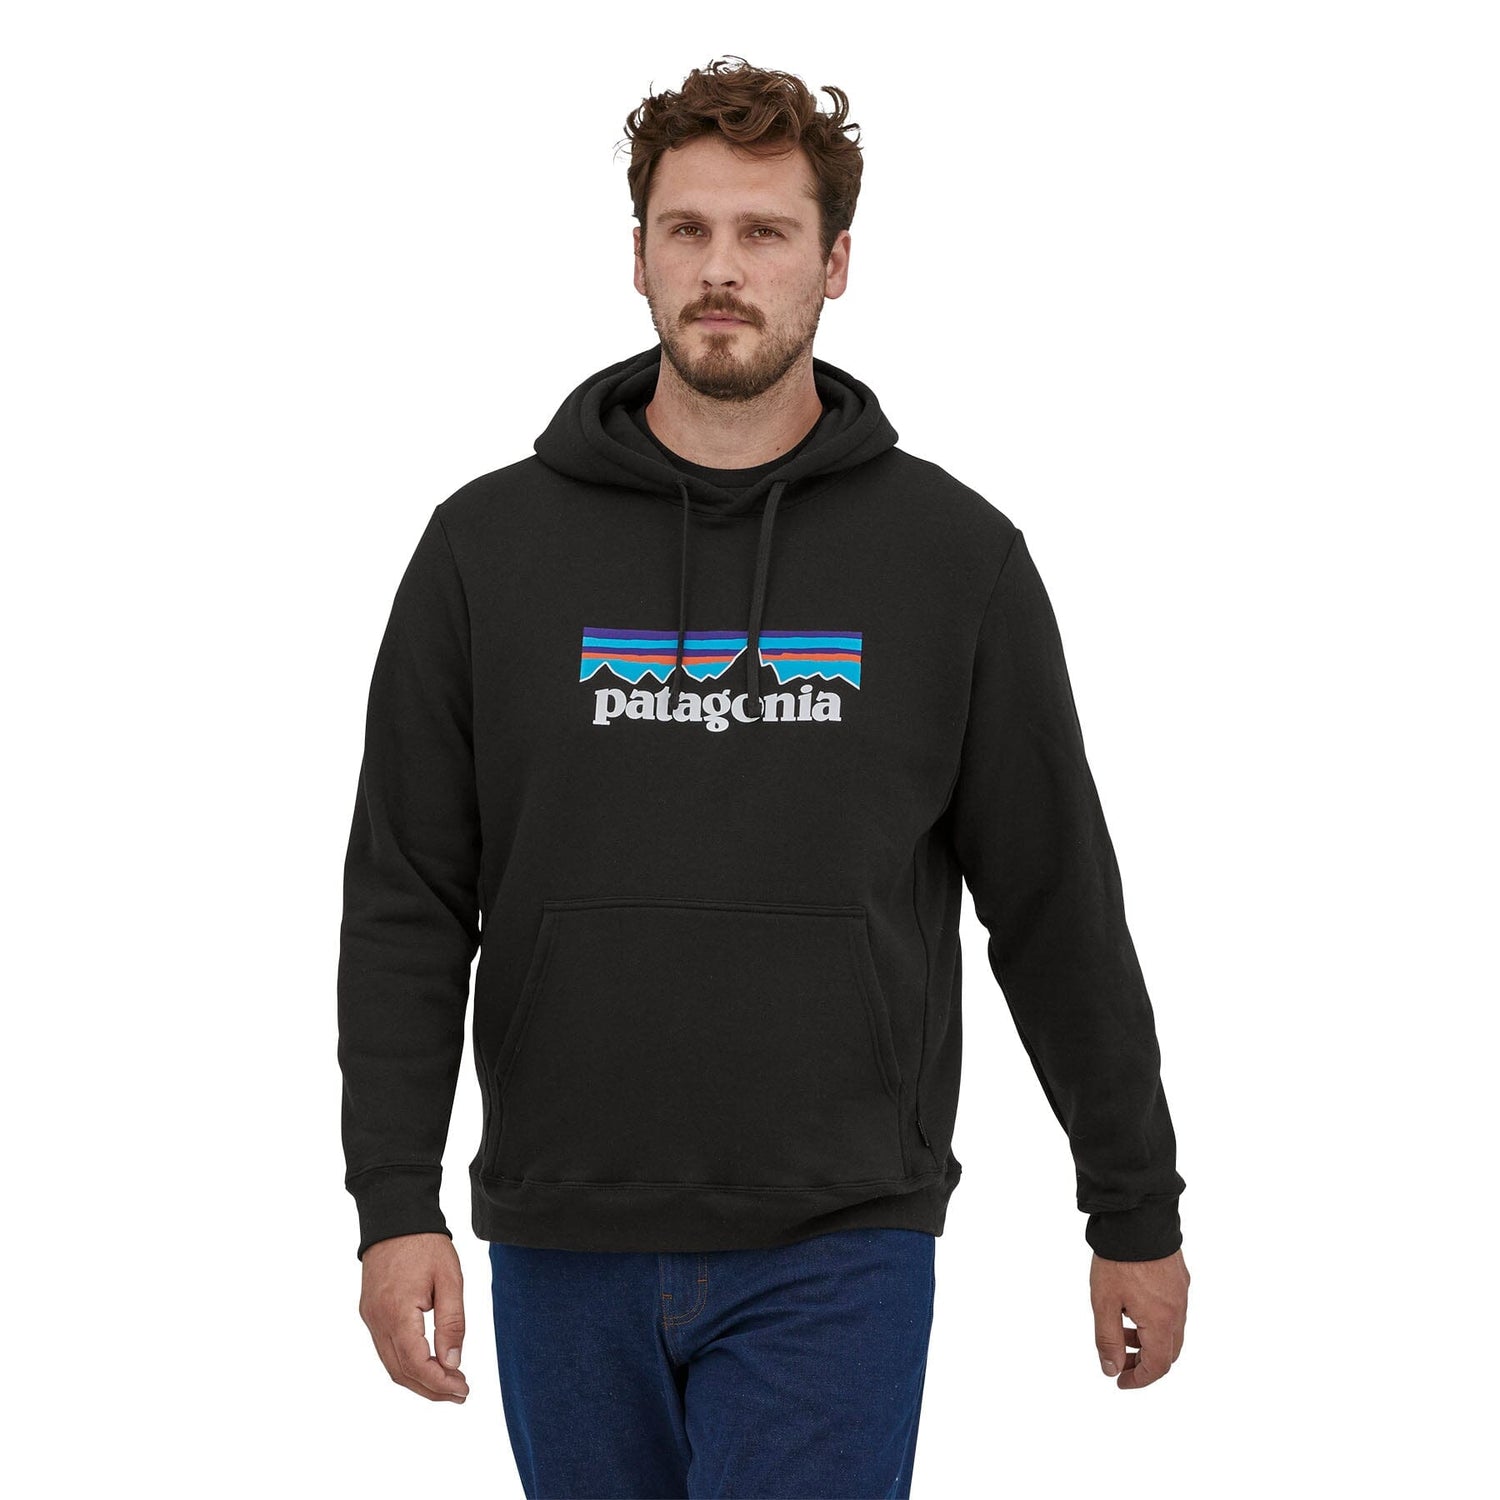 Unisex P-6 Logo Uprisal Hoody - Made From Recycled Cotton & Recycled Polyester Shirt Patagonia Black S 